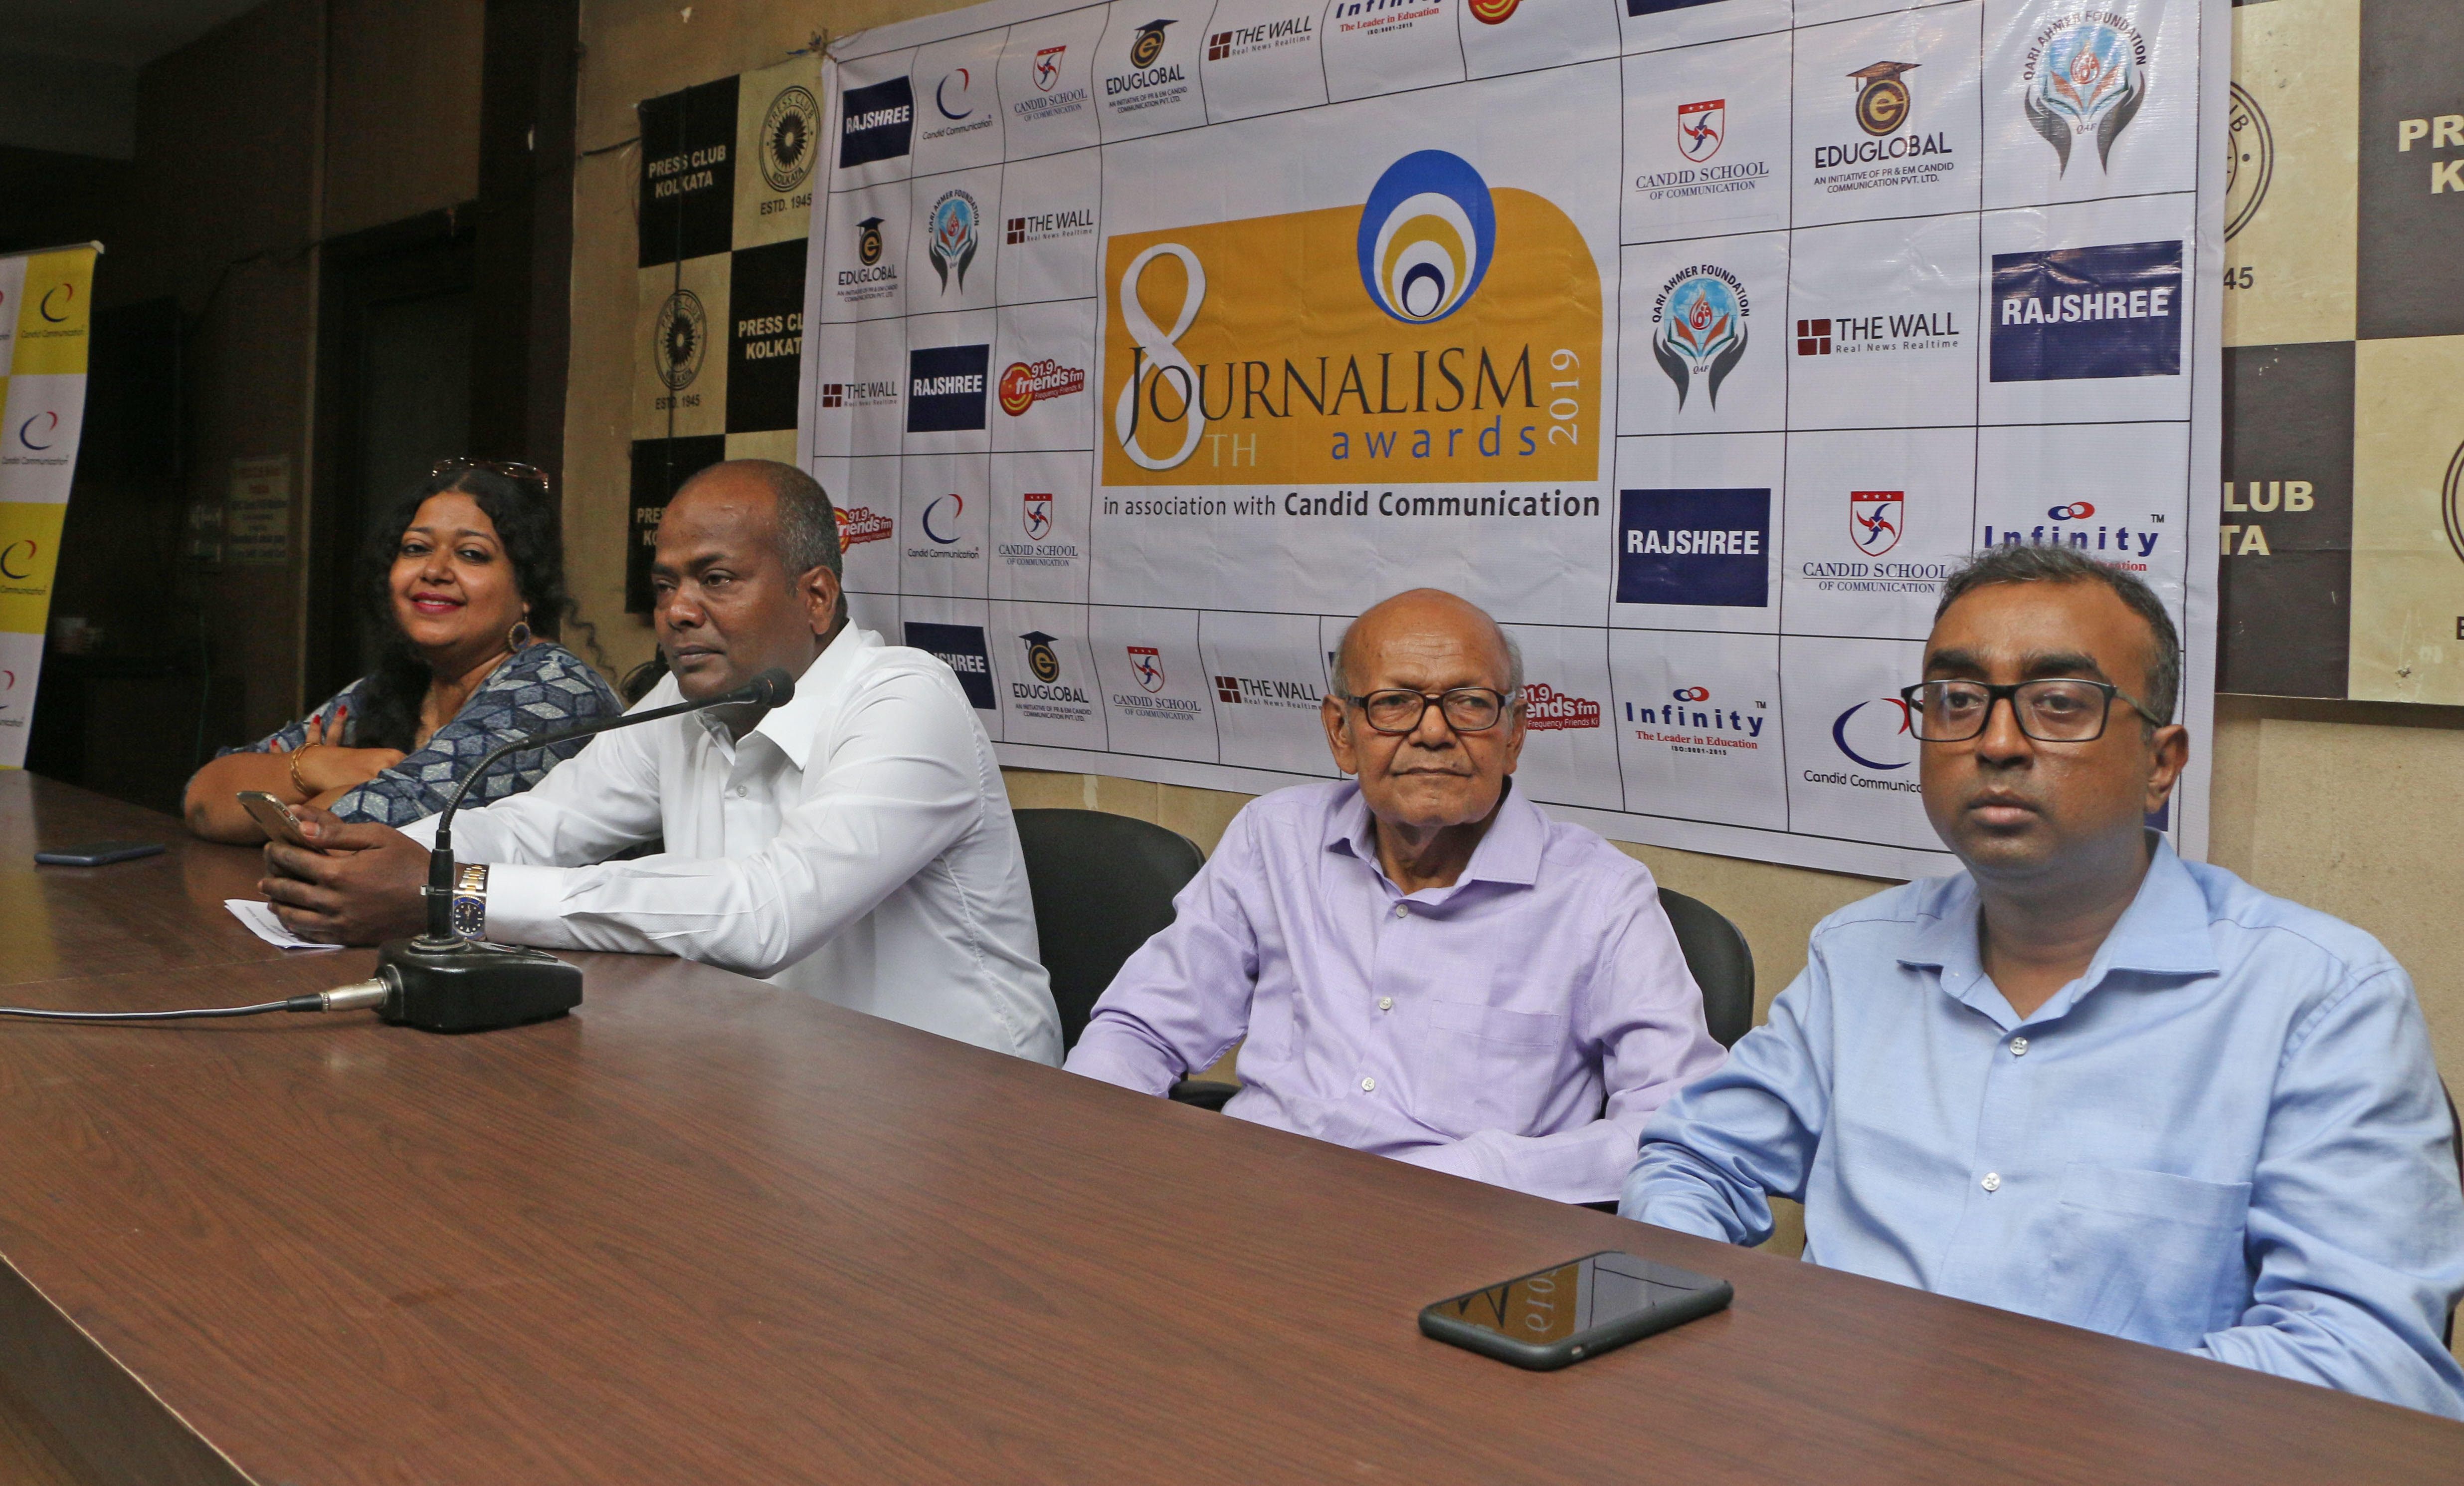 Journalism​ Awards​ Committee announces “Journalism Awards 2019”